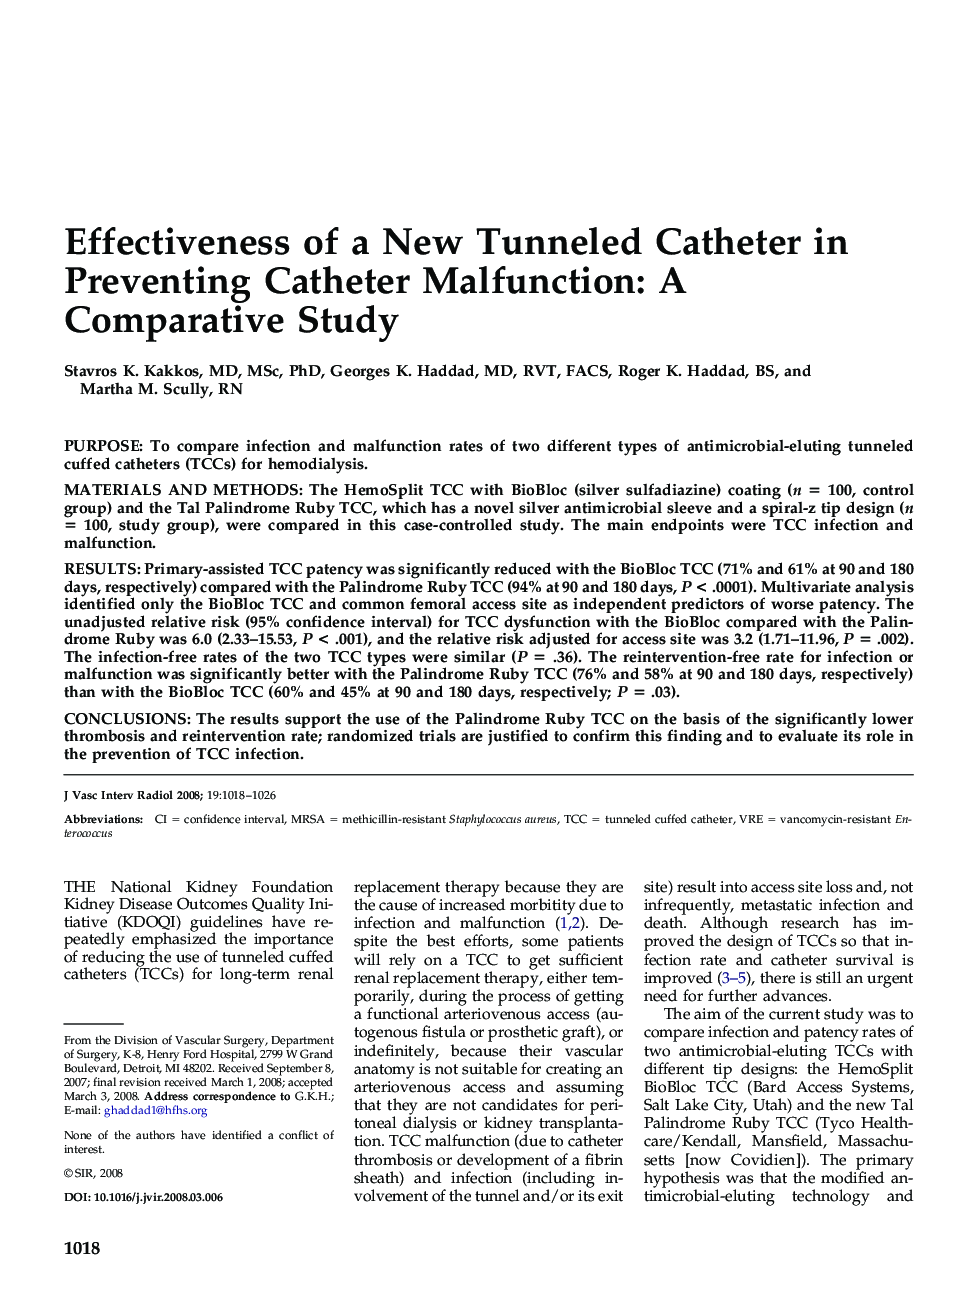 Effectiveness of a New Tunneled Catheter in Preventing Catheter Malfunction: A Comparative Study